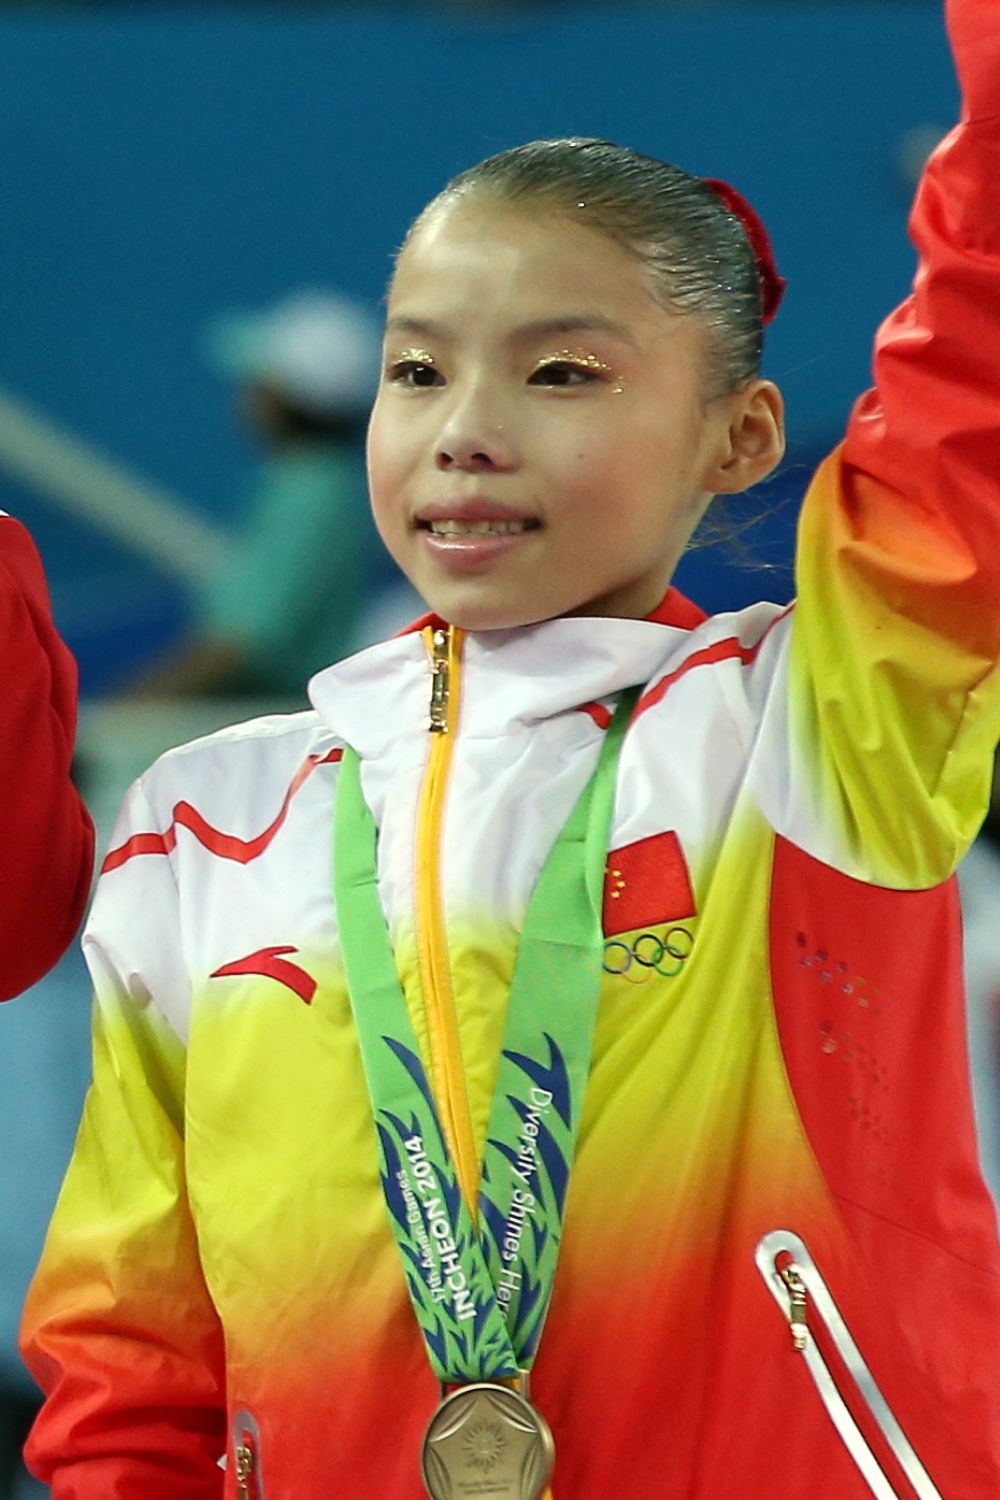 Shang Chunsong Is A Chinese Artistic Gymnast